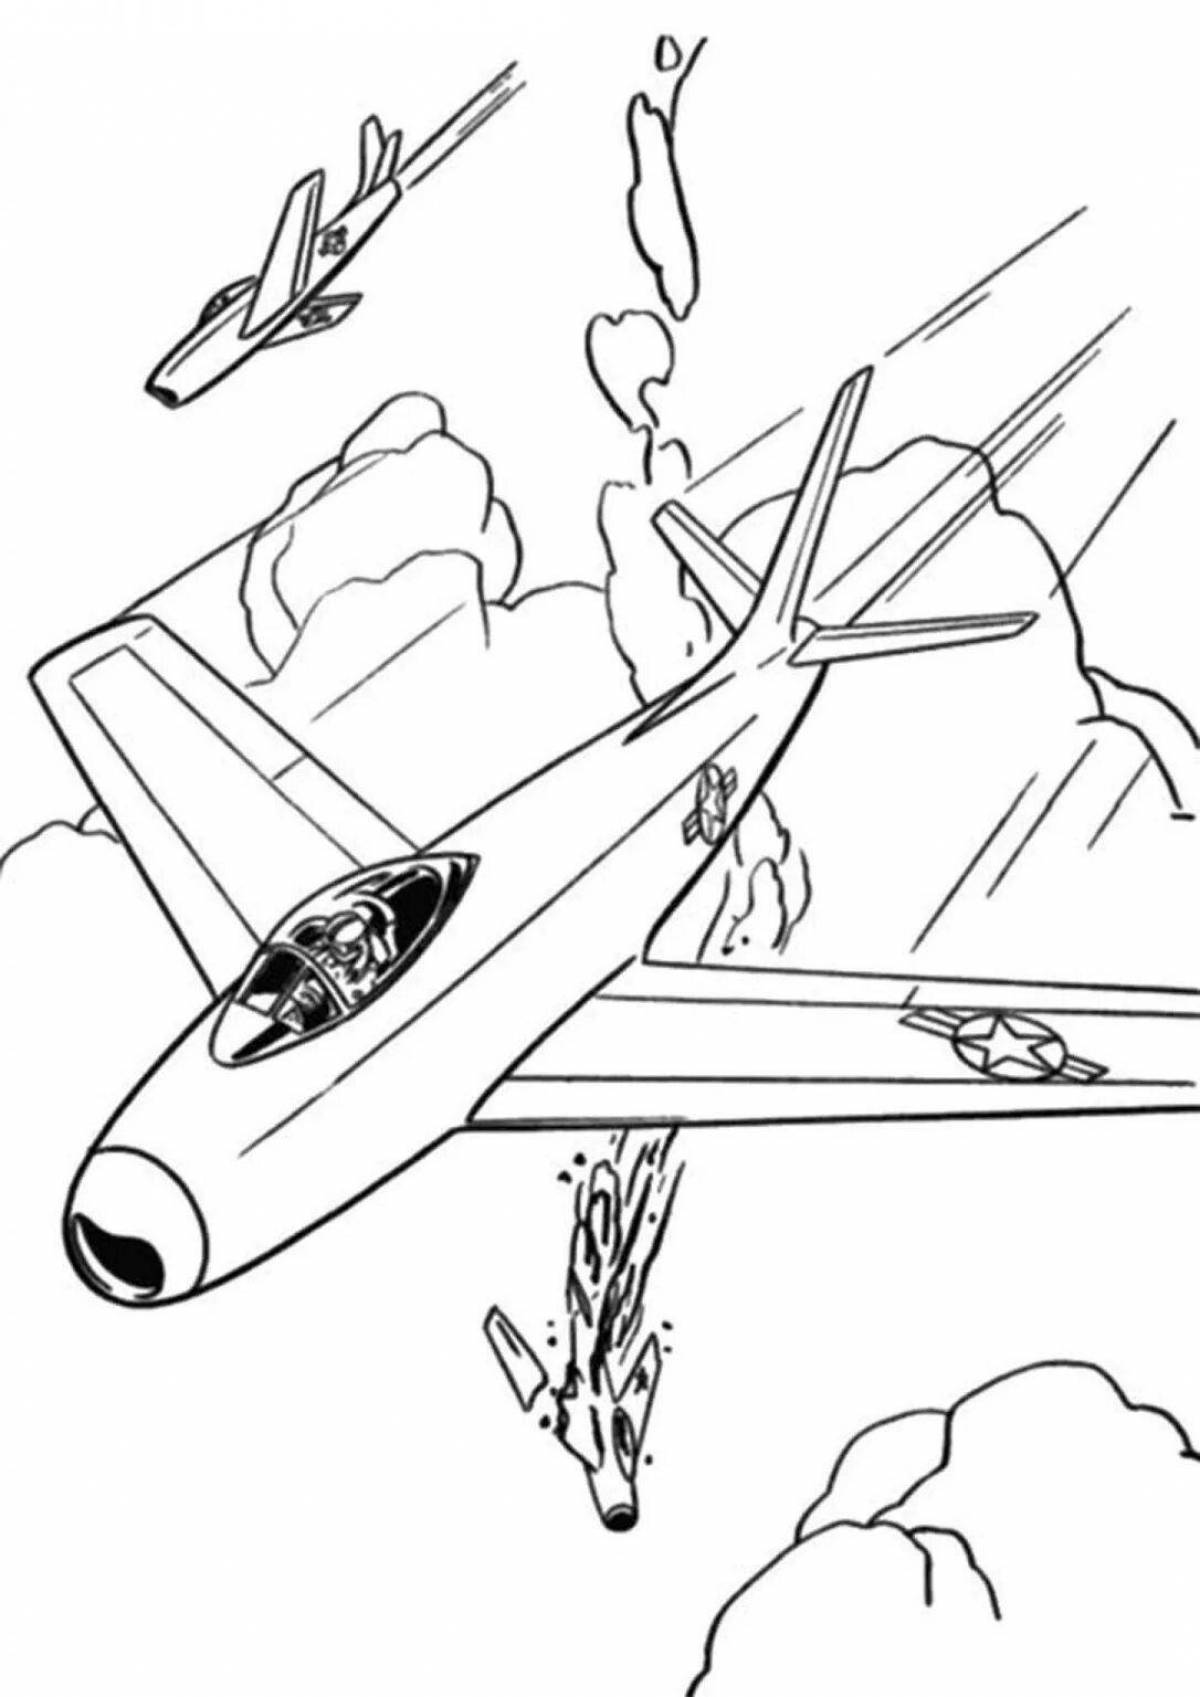 Colorful war coloring page for kids